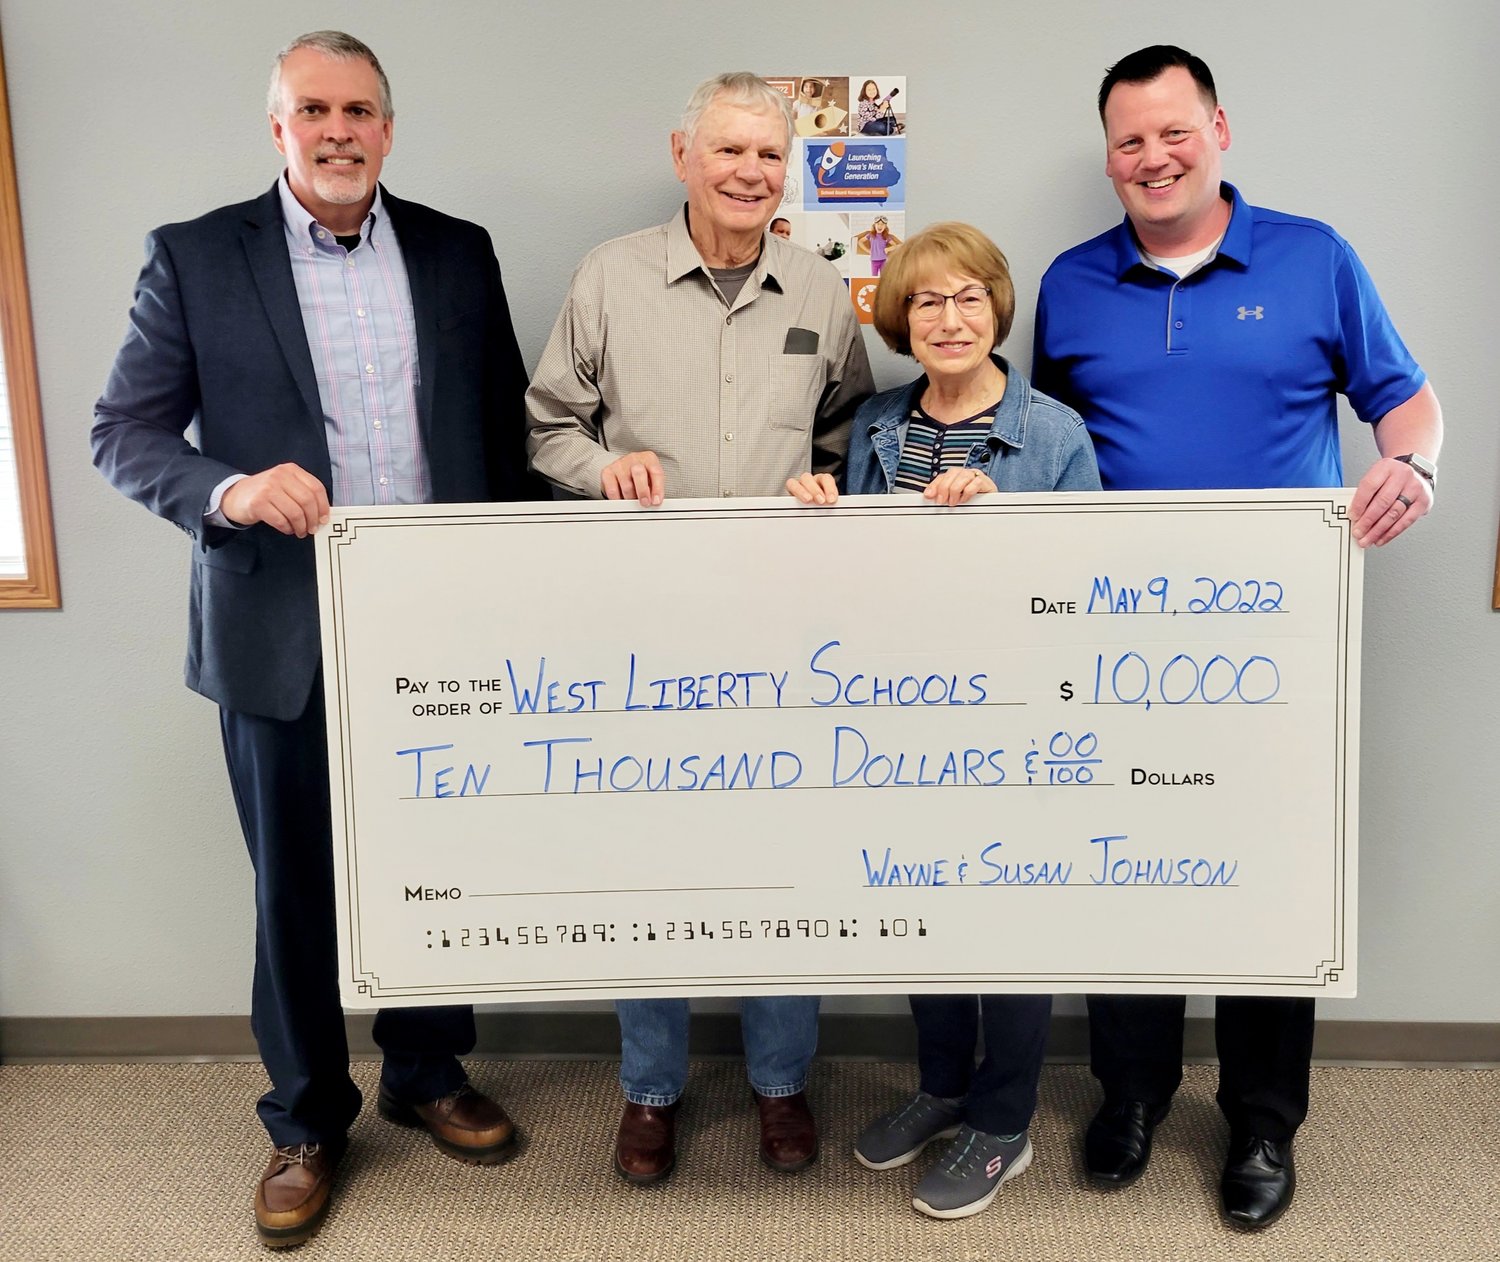 Former WLHS track coach Wayne Johnson and his wife, Susan, have pledged $10,000 towards the new sports complex. Accepting the check is Superintendent Shaun Kruger, on left, and Activities Director Adam Loria, right.